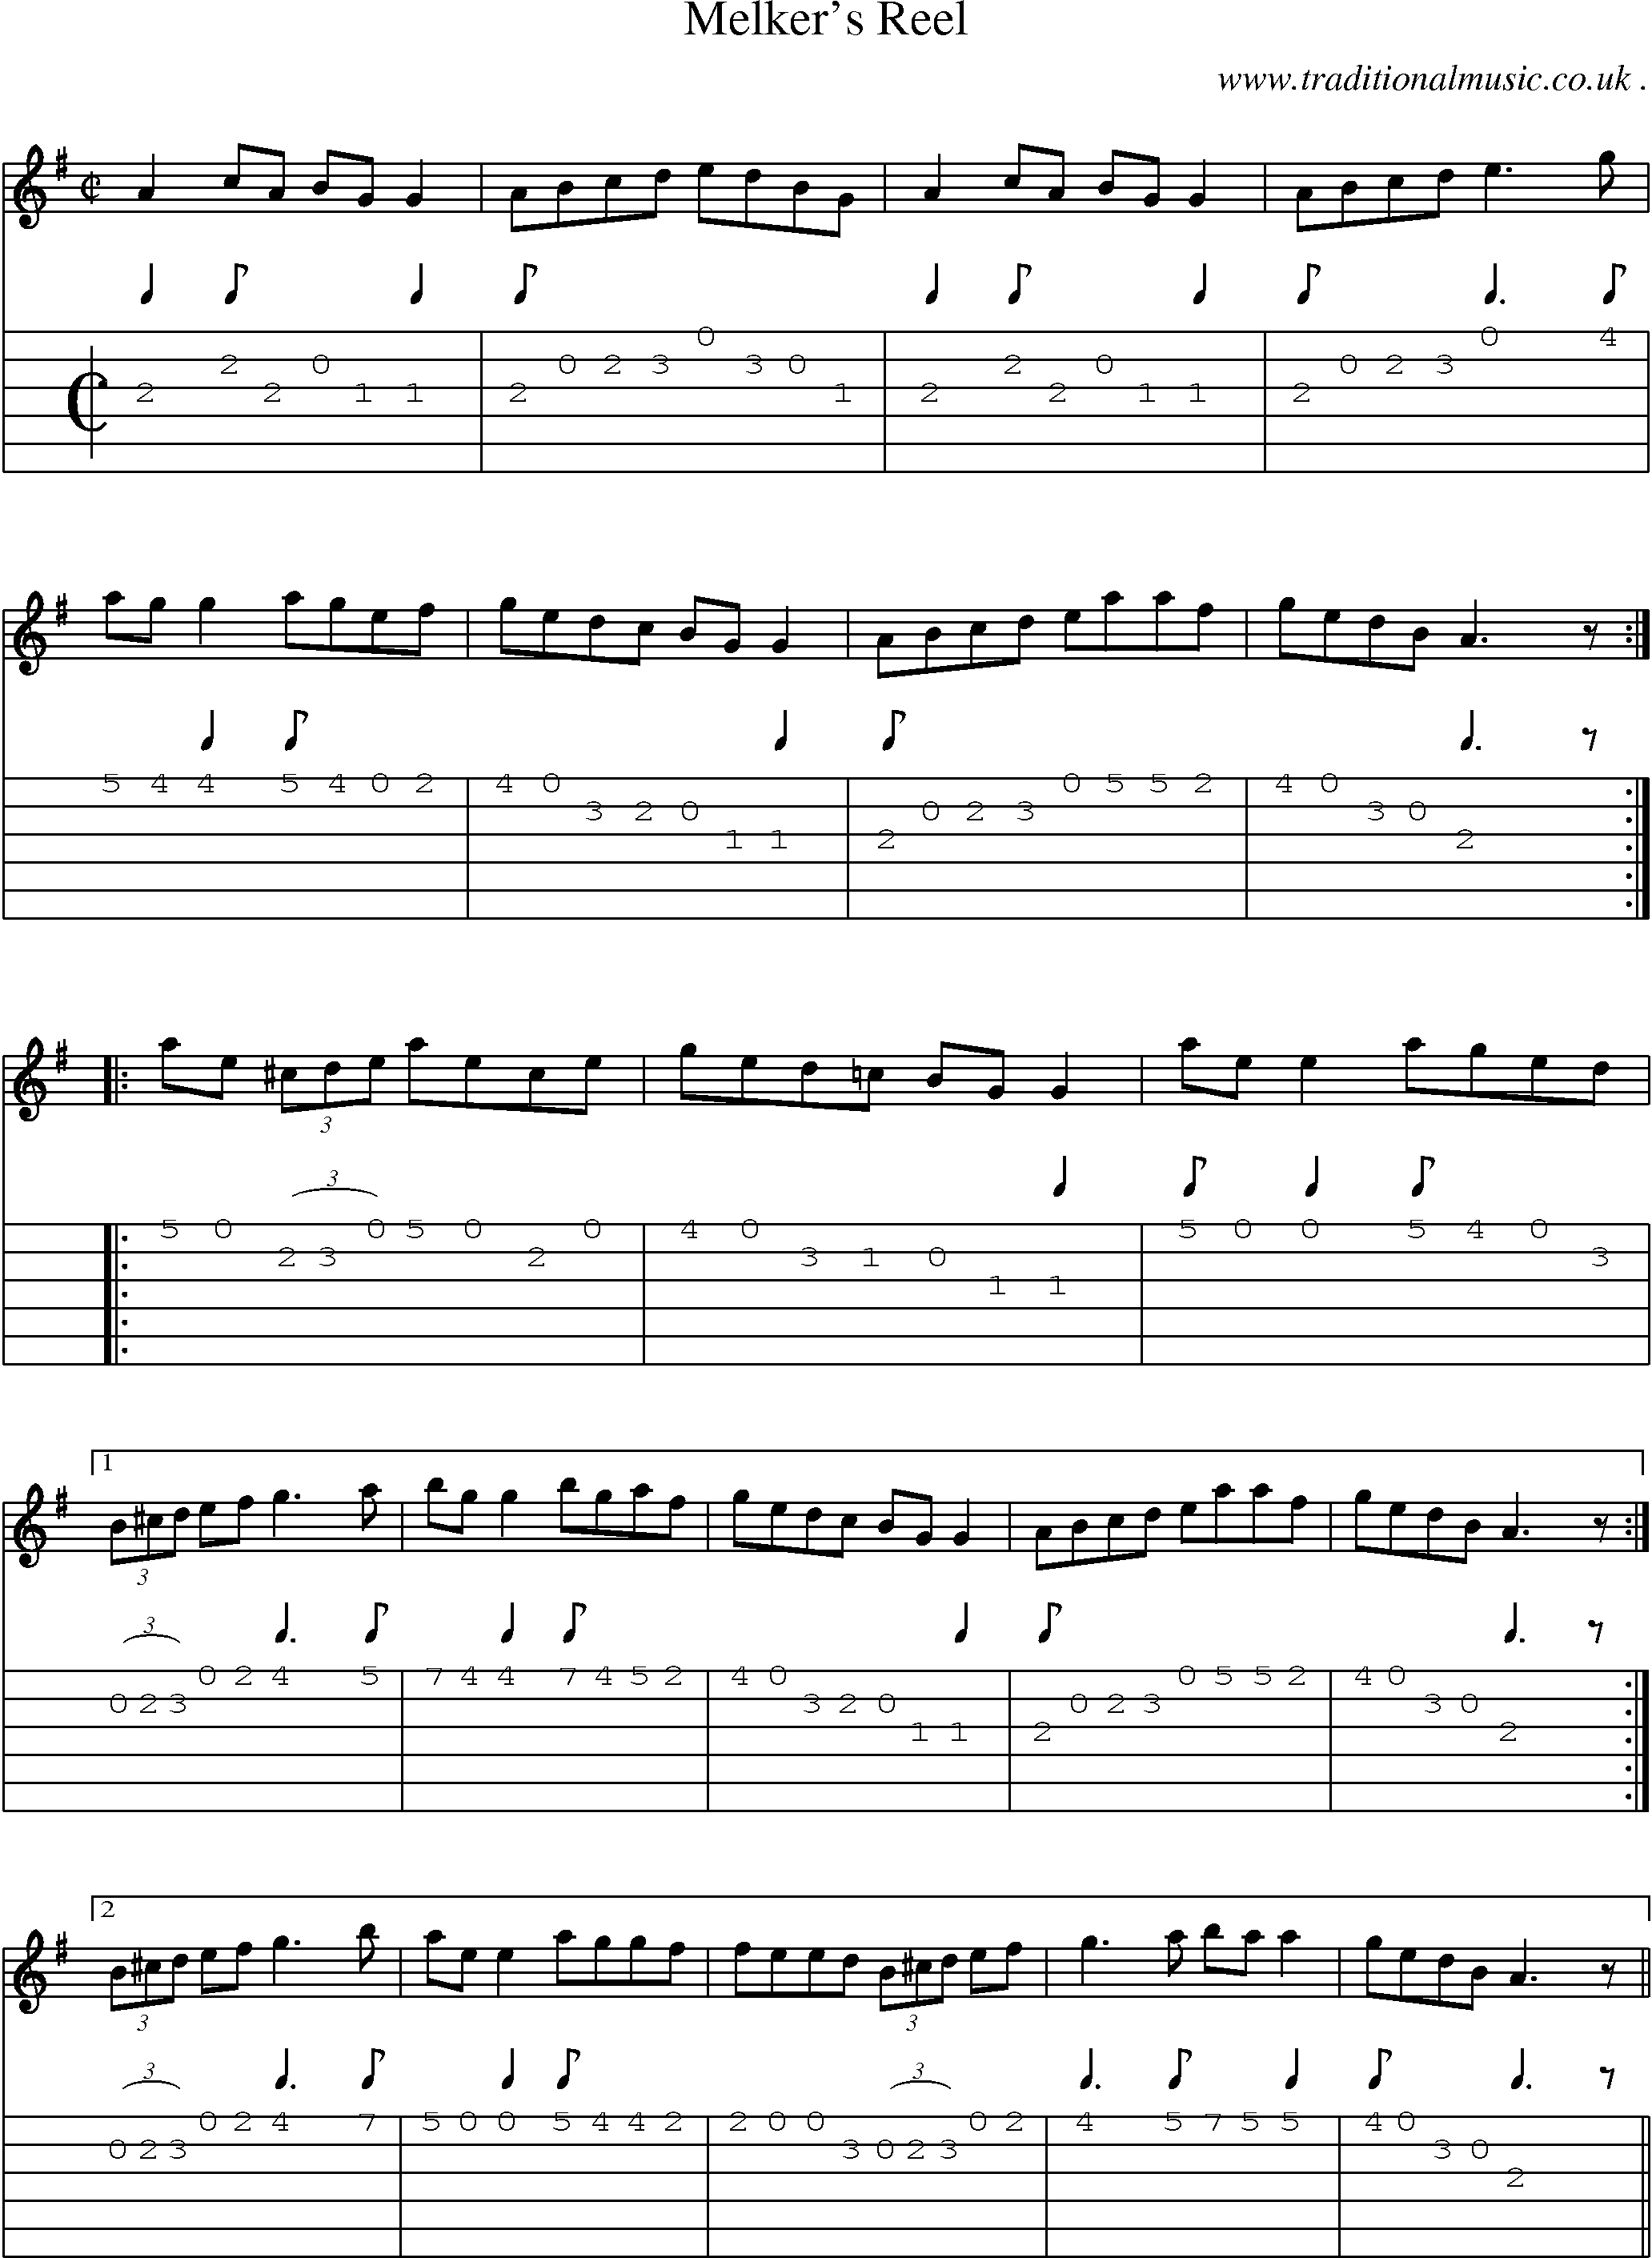 Sheet-Music and Guitar Tabs for Melkers Reel